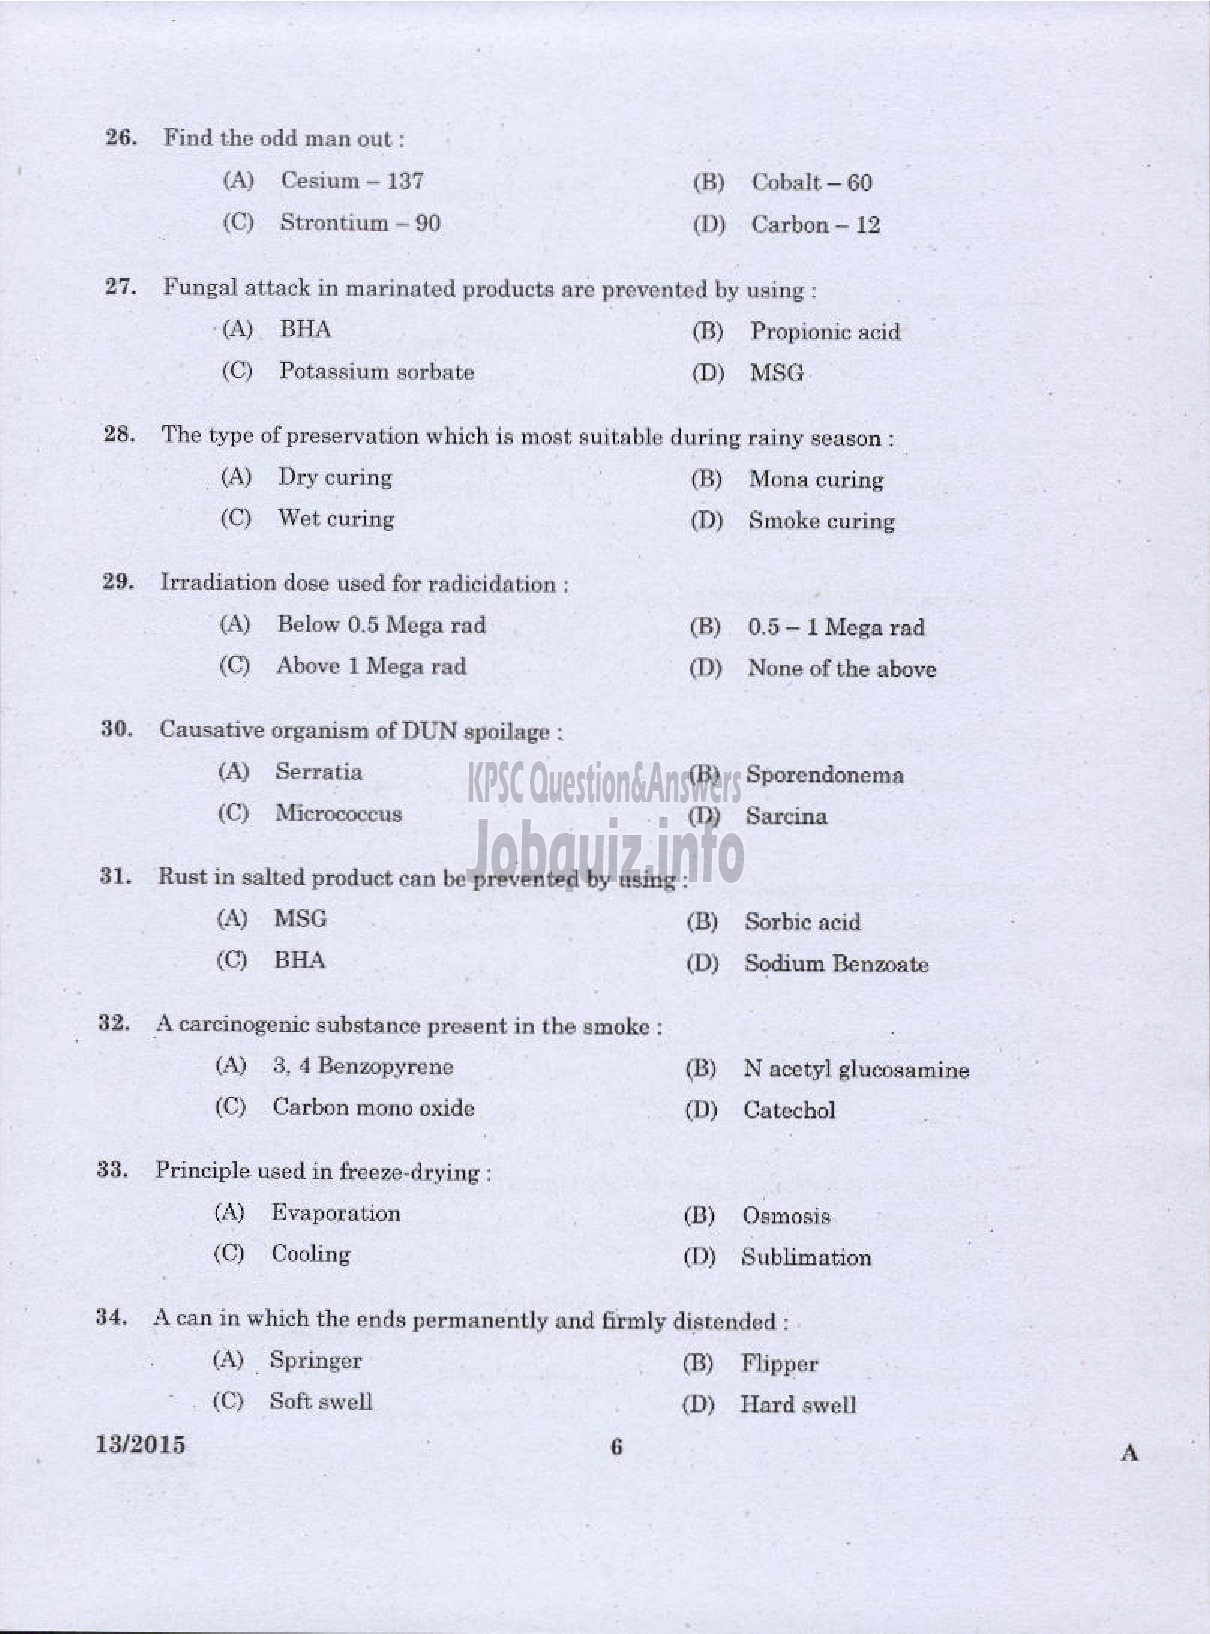 Kerala PSC Question Paper - LABORATORY TECHNICAL ASSISTANT FISHERIES FISH PROCESSING TECHNOLOGY VOCATIONAL HIGHER SECONDARY EDUCATION-4